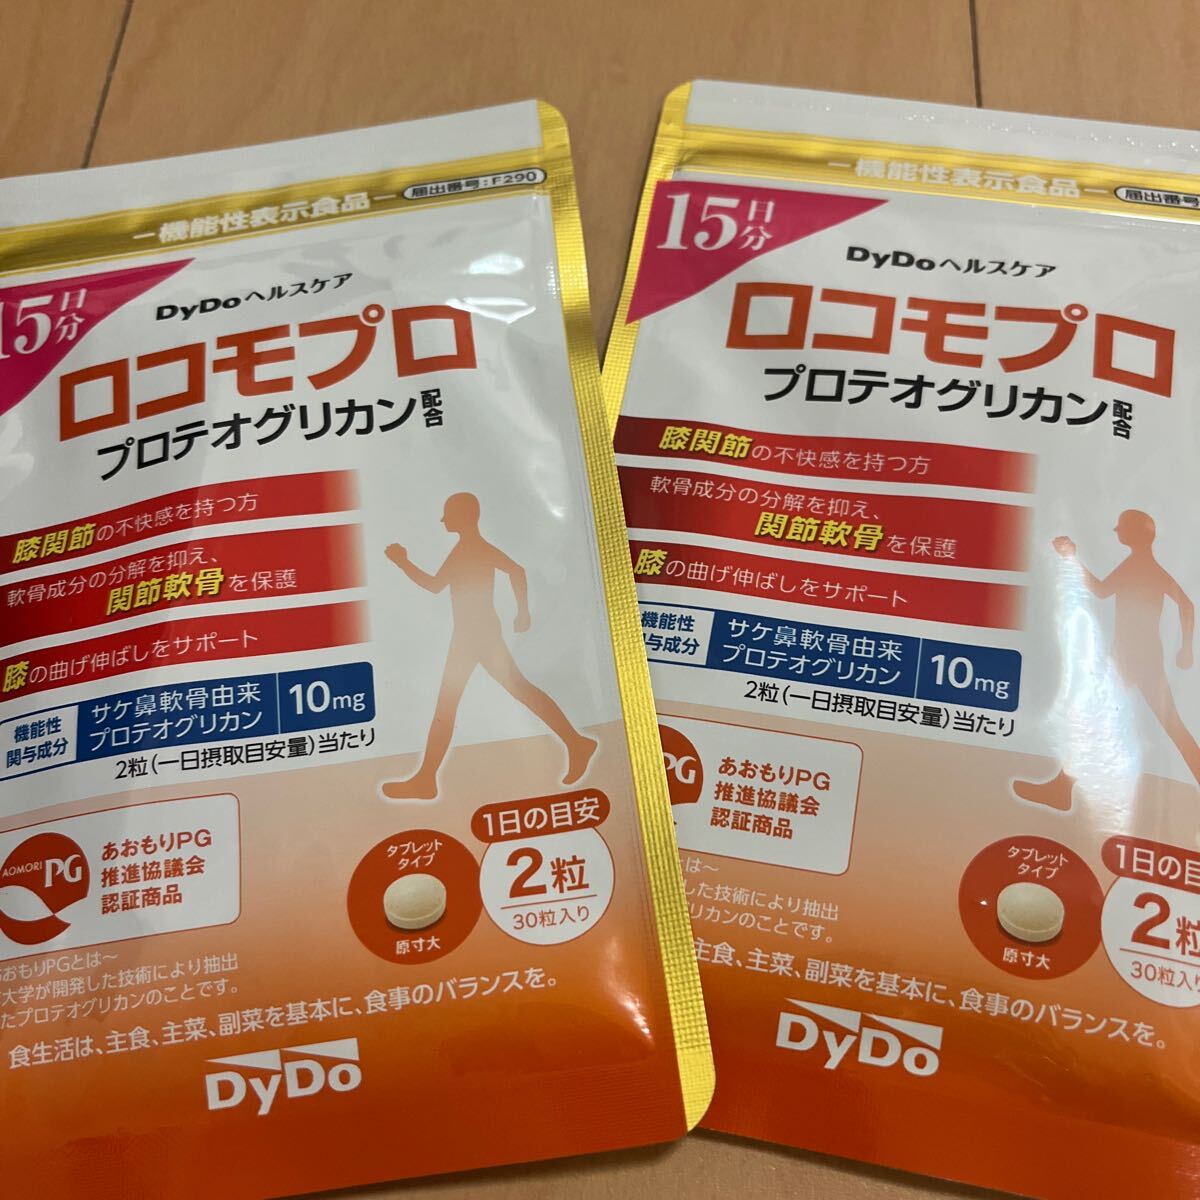 ro Como Pro Pro teo Gris can 15 day minute new package 200mg×30 bead DyDo health care 2 sack set 